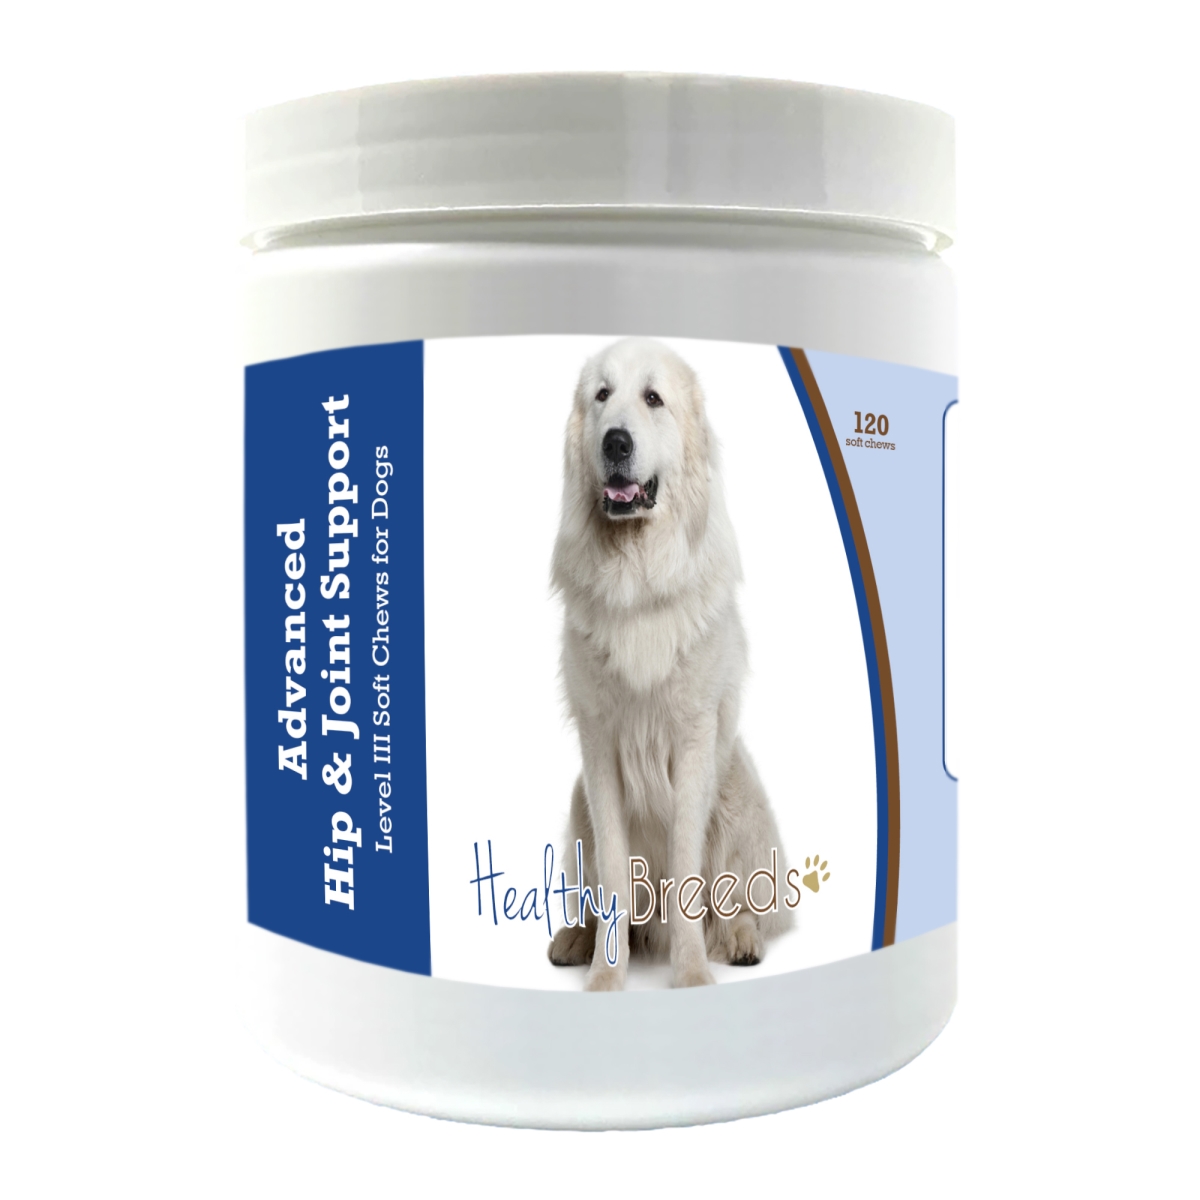 Picture of Healthy Breeds 192959899061 Great Pyrenees Advanced Hip & Joint Support Level III Soft Chews for Dogs